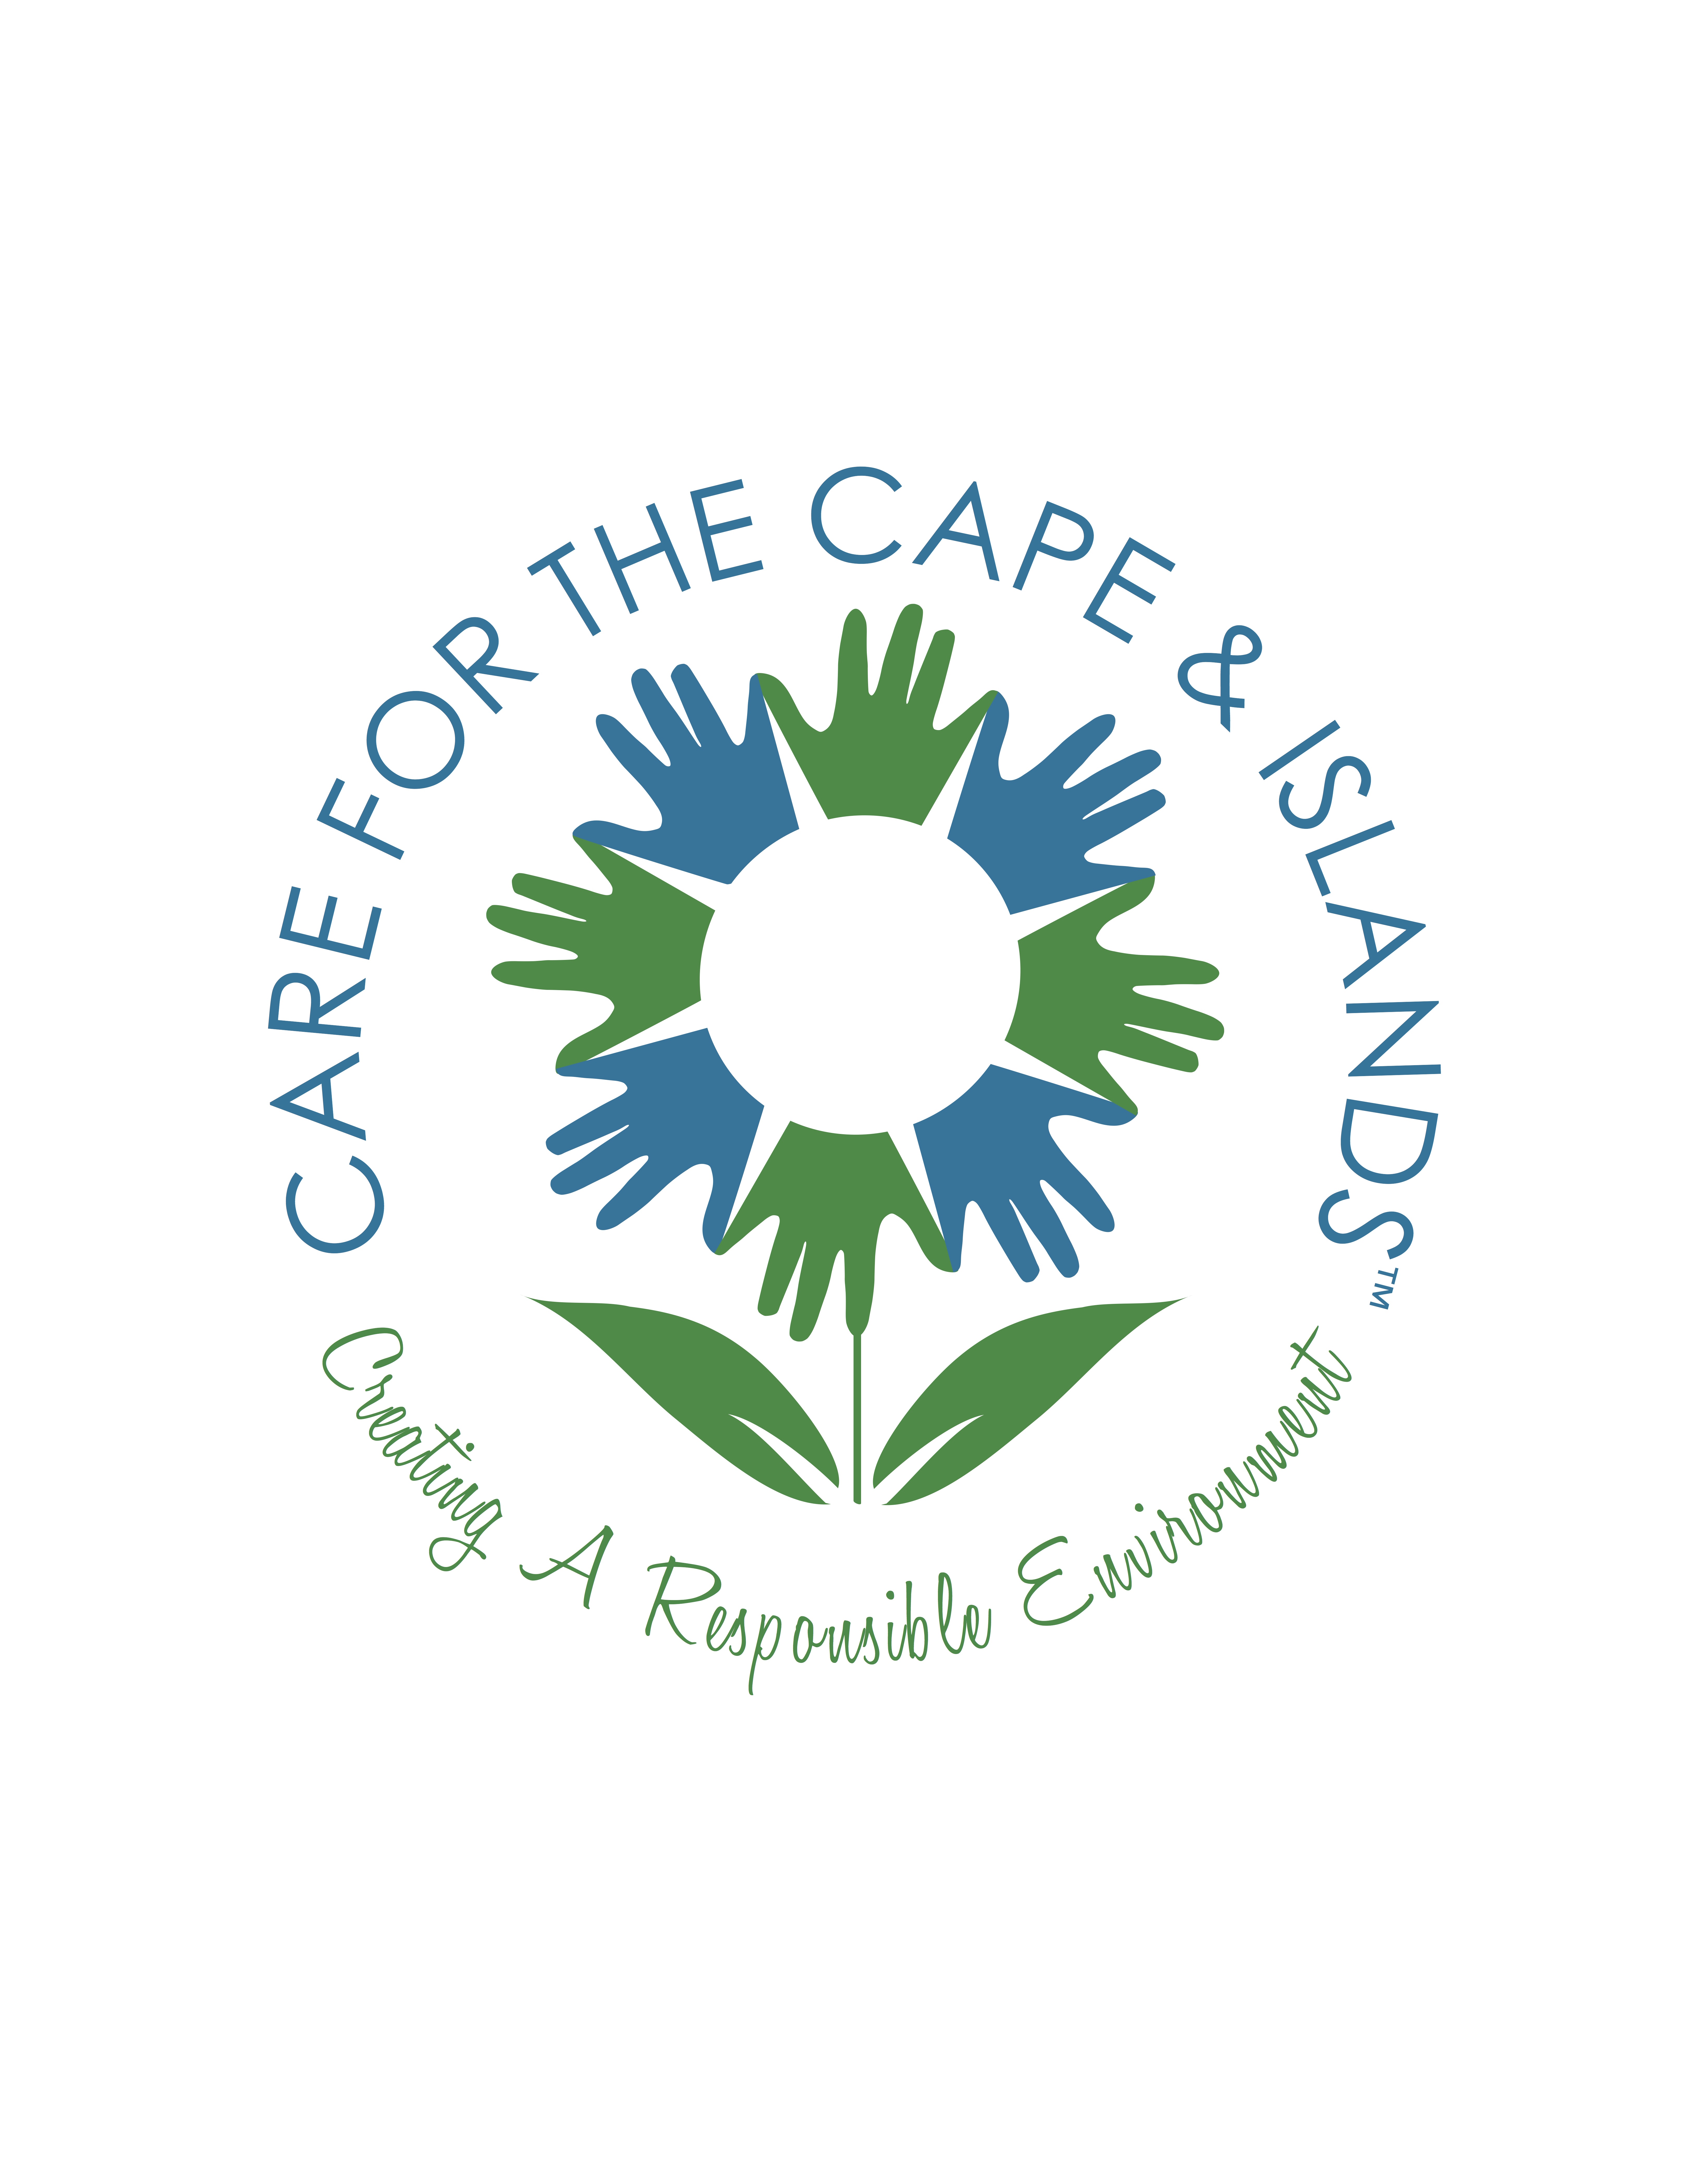 Care for the Cape and Islands logo